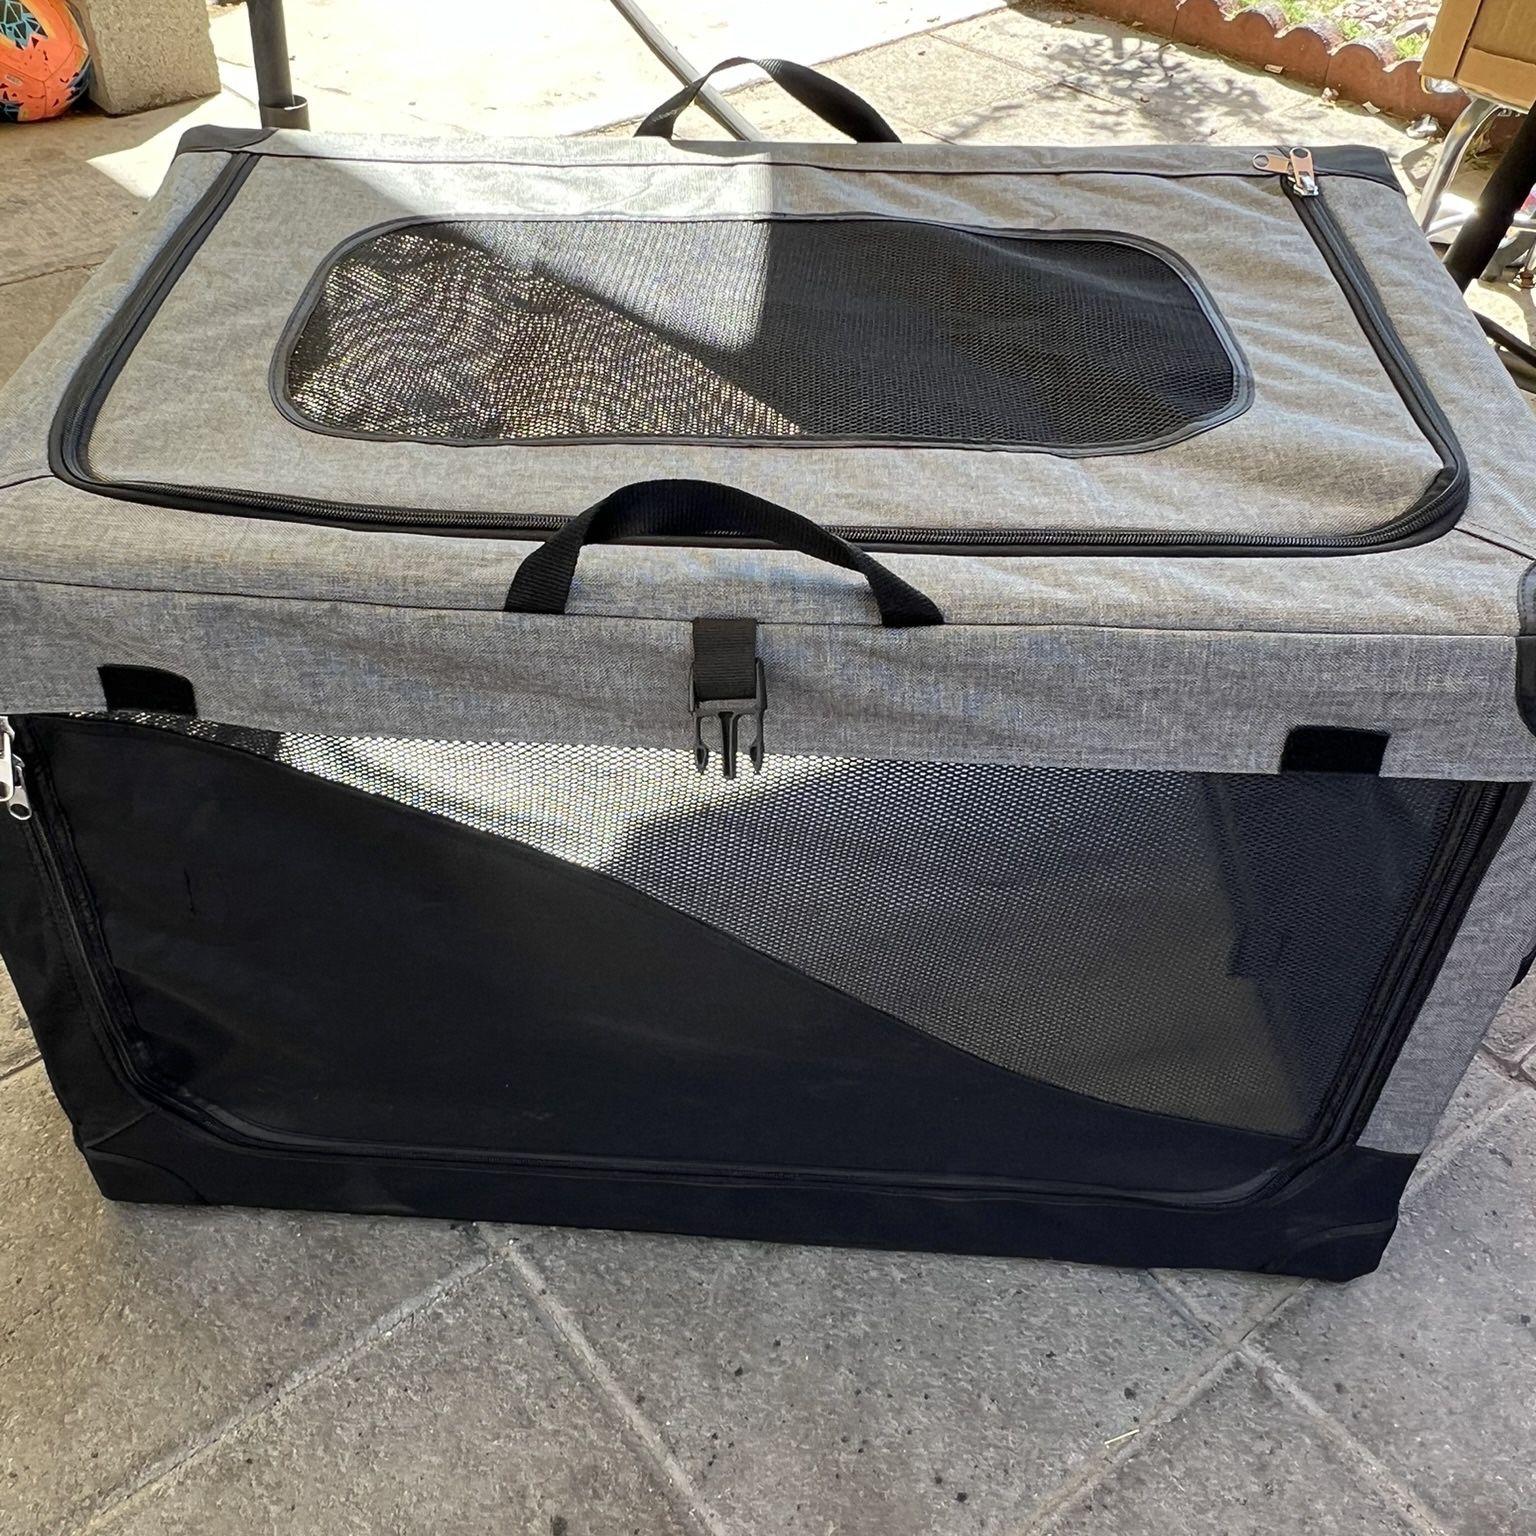 Portable Dog Cage/crate